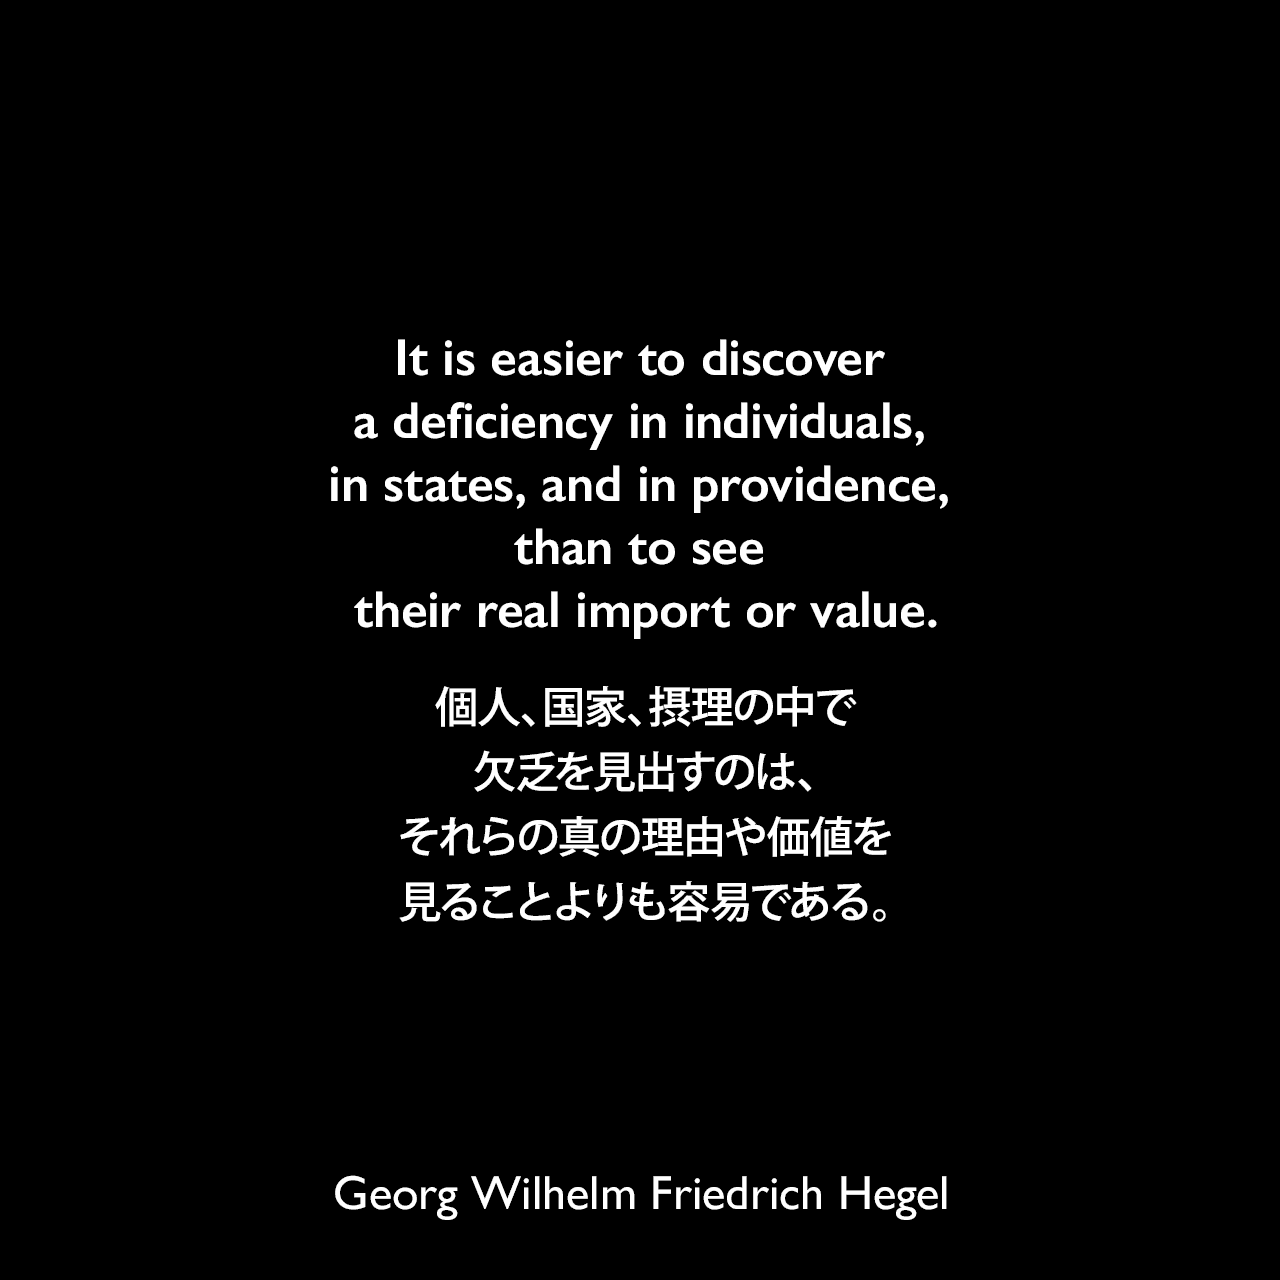 It is easier to discover a deficiency in individuals, in states, and in providence, than to see their real import or value.個人、国家、摂理の中で欠乏を見出すのは、それらの真の理由や価値を見ることよりも容易である。- ヘーゲルによる本「Lectures on the Philosophy of History」よりGeorg Wilhelm Friedrich Hegel